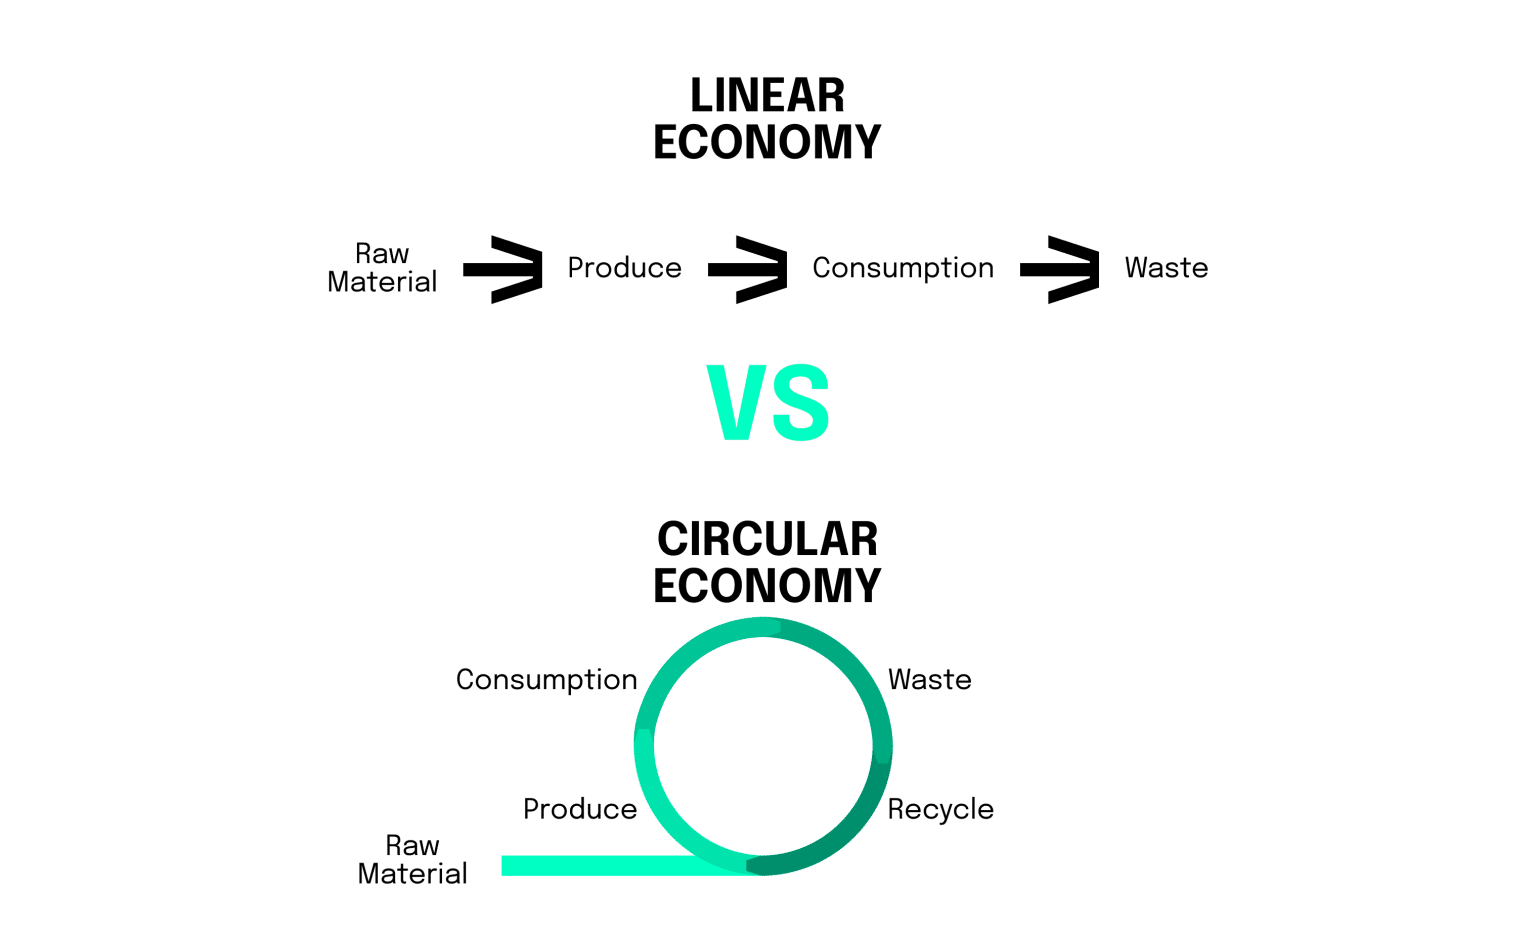 The difference between linear and circular economy